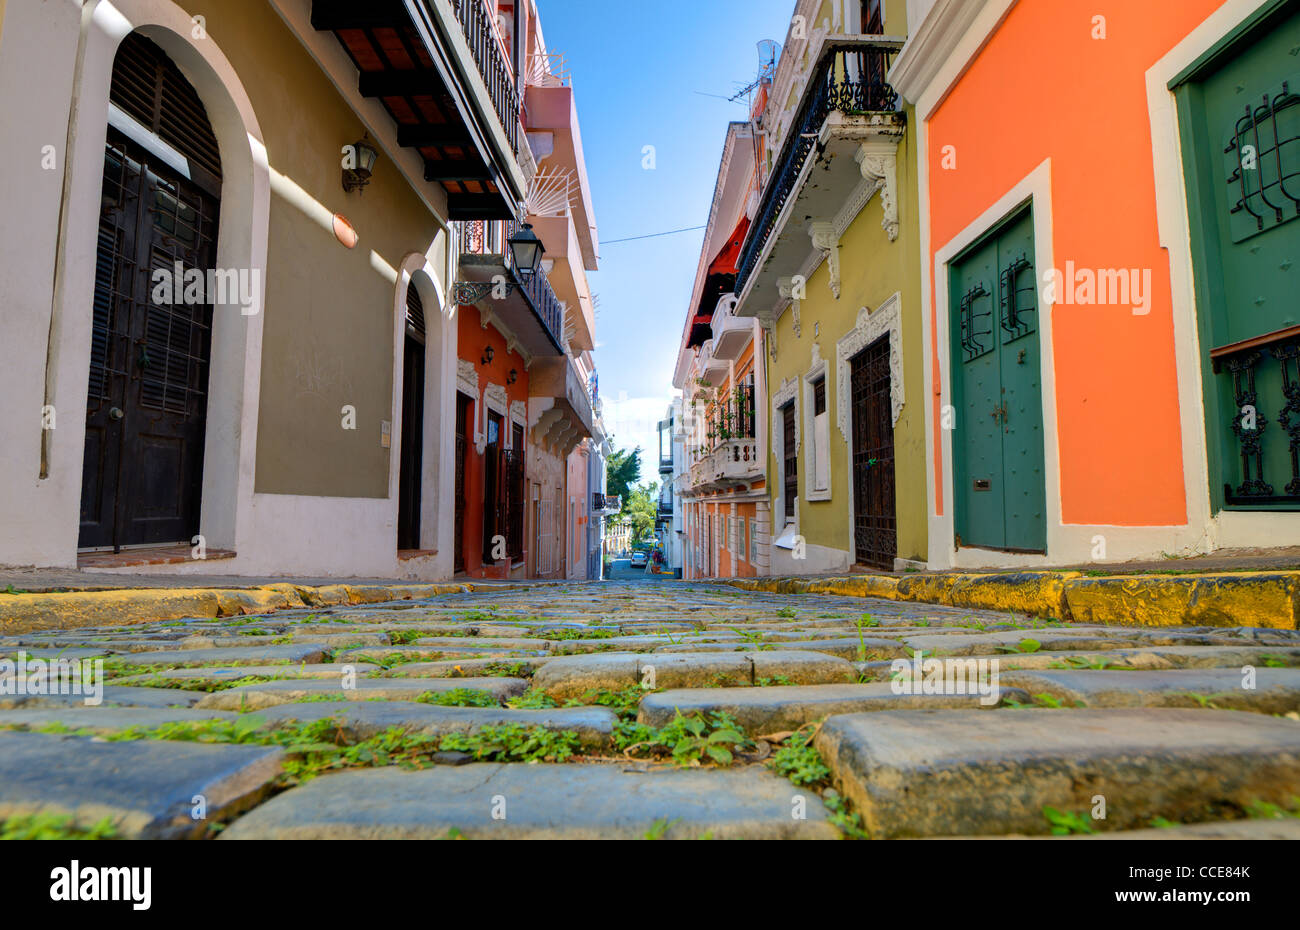 Alley in the old city of San Juan, Puerto Rico. Stock Photo